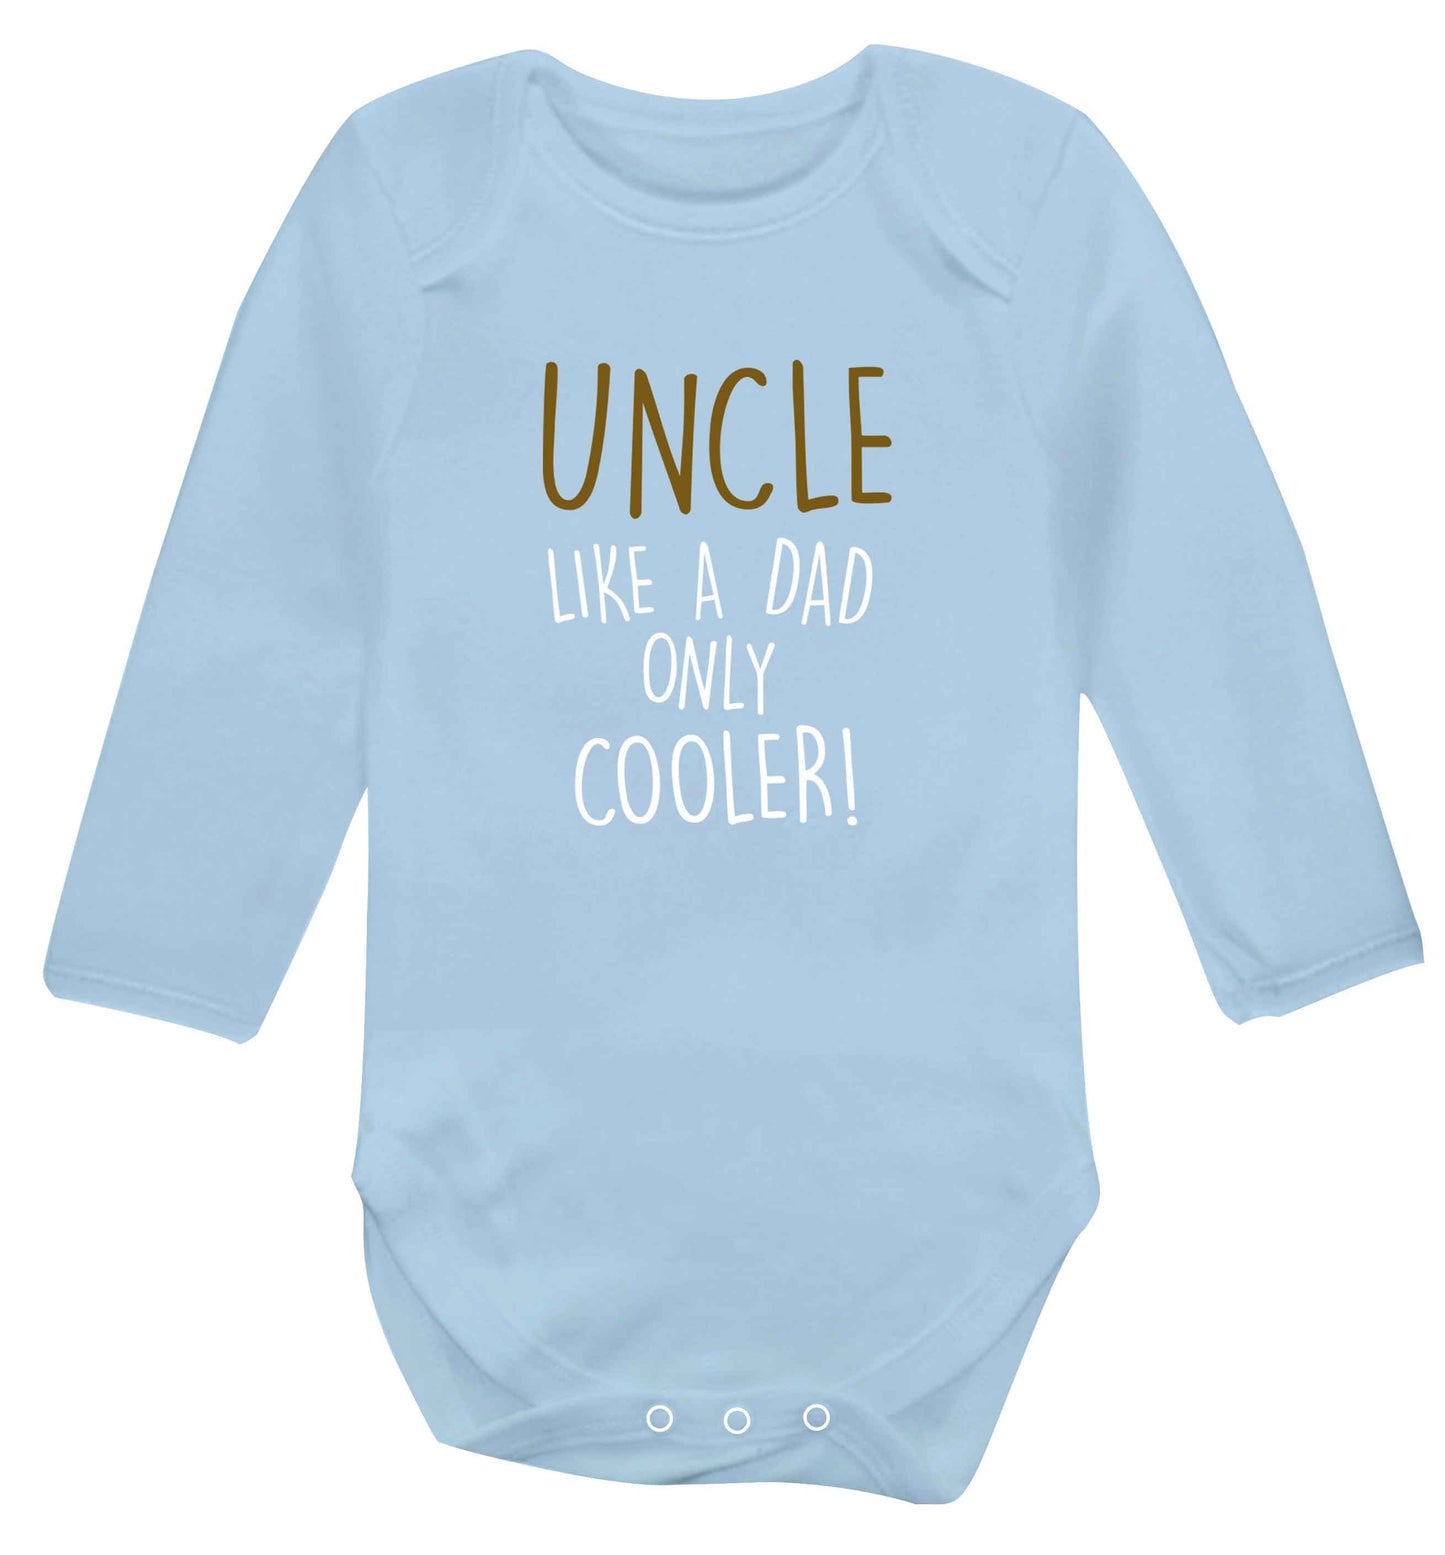 Uncle like a dad only cooler baby vest long sleeved pale blue 6-12 months